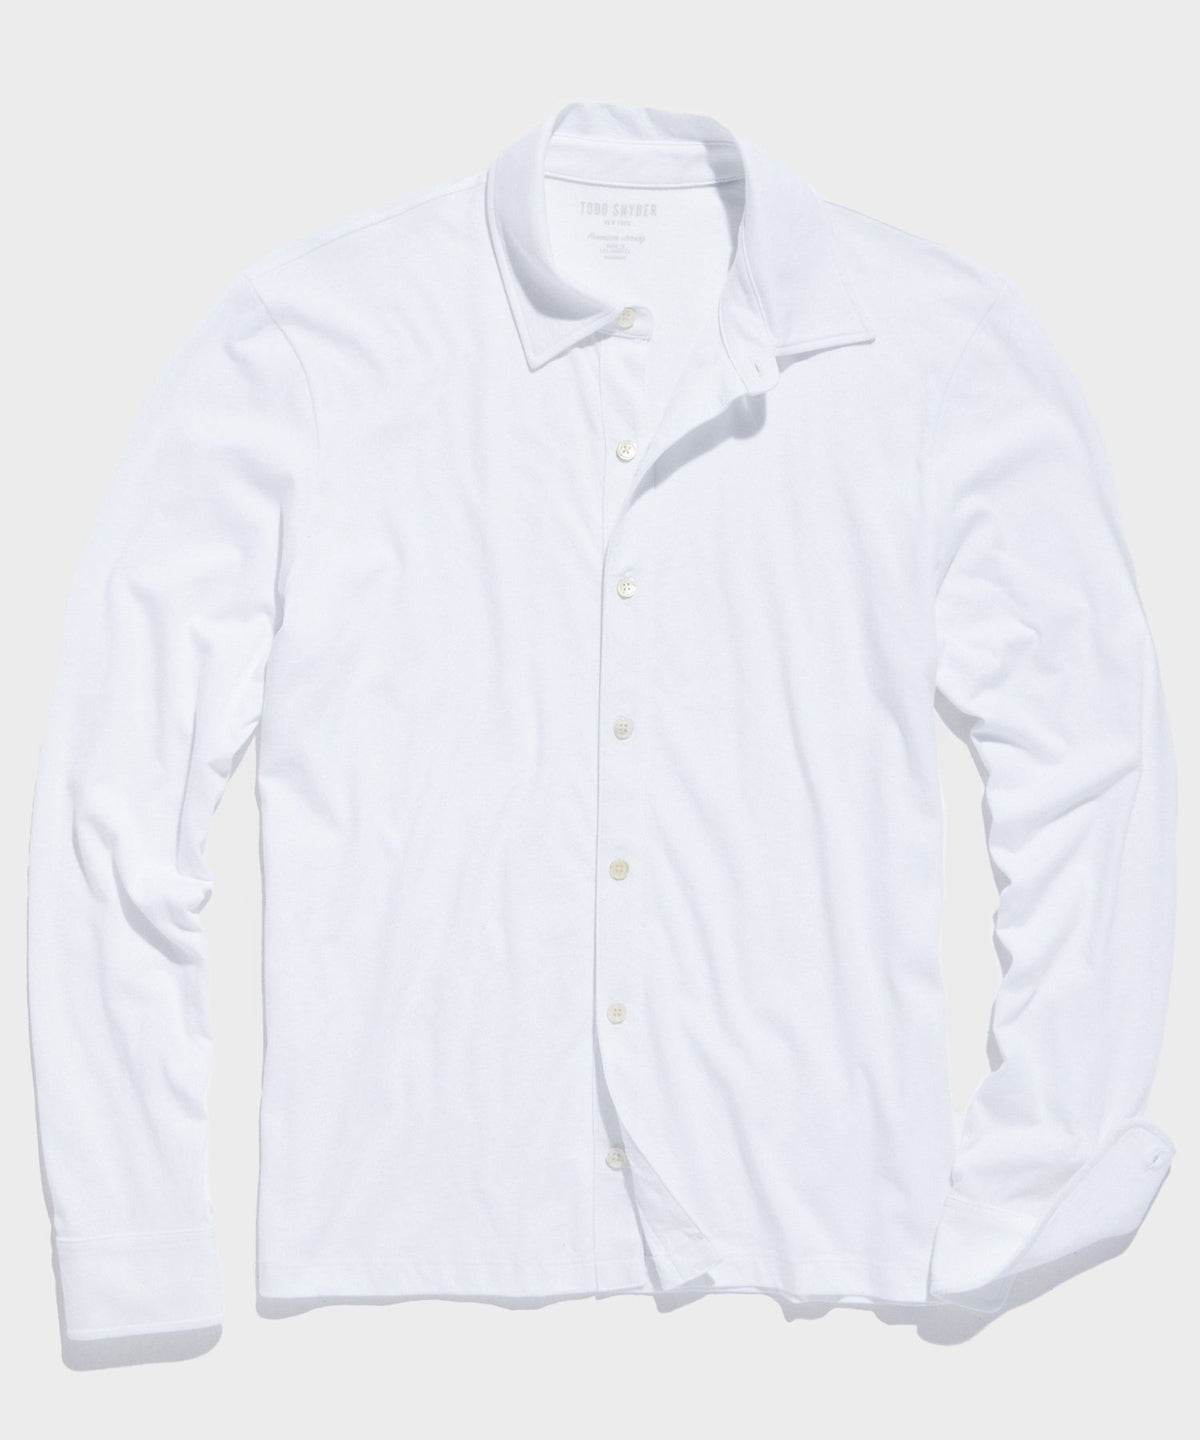 Made in L.A. Full-Placket Jersey Polo in White